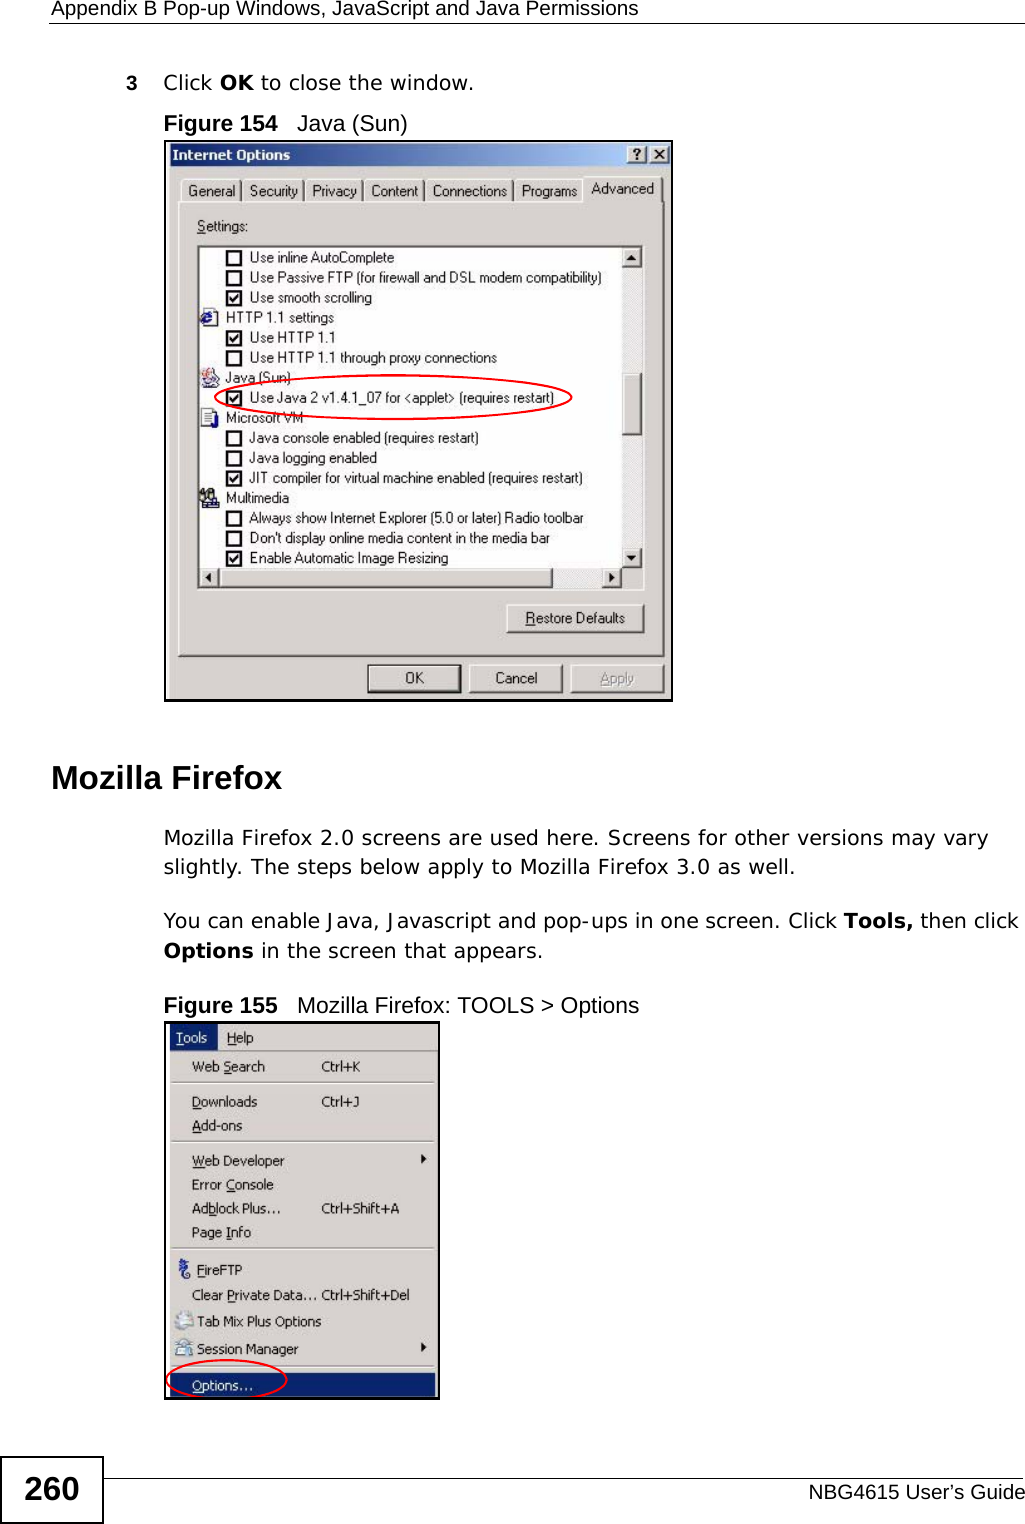 Appendix B Pop-up Windows, JavaScript and Java PermissionsNBG4615 User’s Guide2603Click OK to close the window.Figure 154   Java (Sun)Mozilla FirefoxMozilla Firefox 2.0 screens are used here. Screens for other versions may vary slightly. The steps below apply to Mozilla Firefox 3.0 as well.You can enable Java, Javascript and pop-ups in one screen. Click Tools, then click Options in the screen that appears.Figure 155   Mozilla Firefox: TOOLS &gt; Options